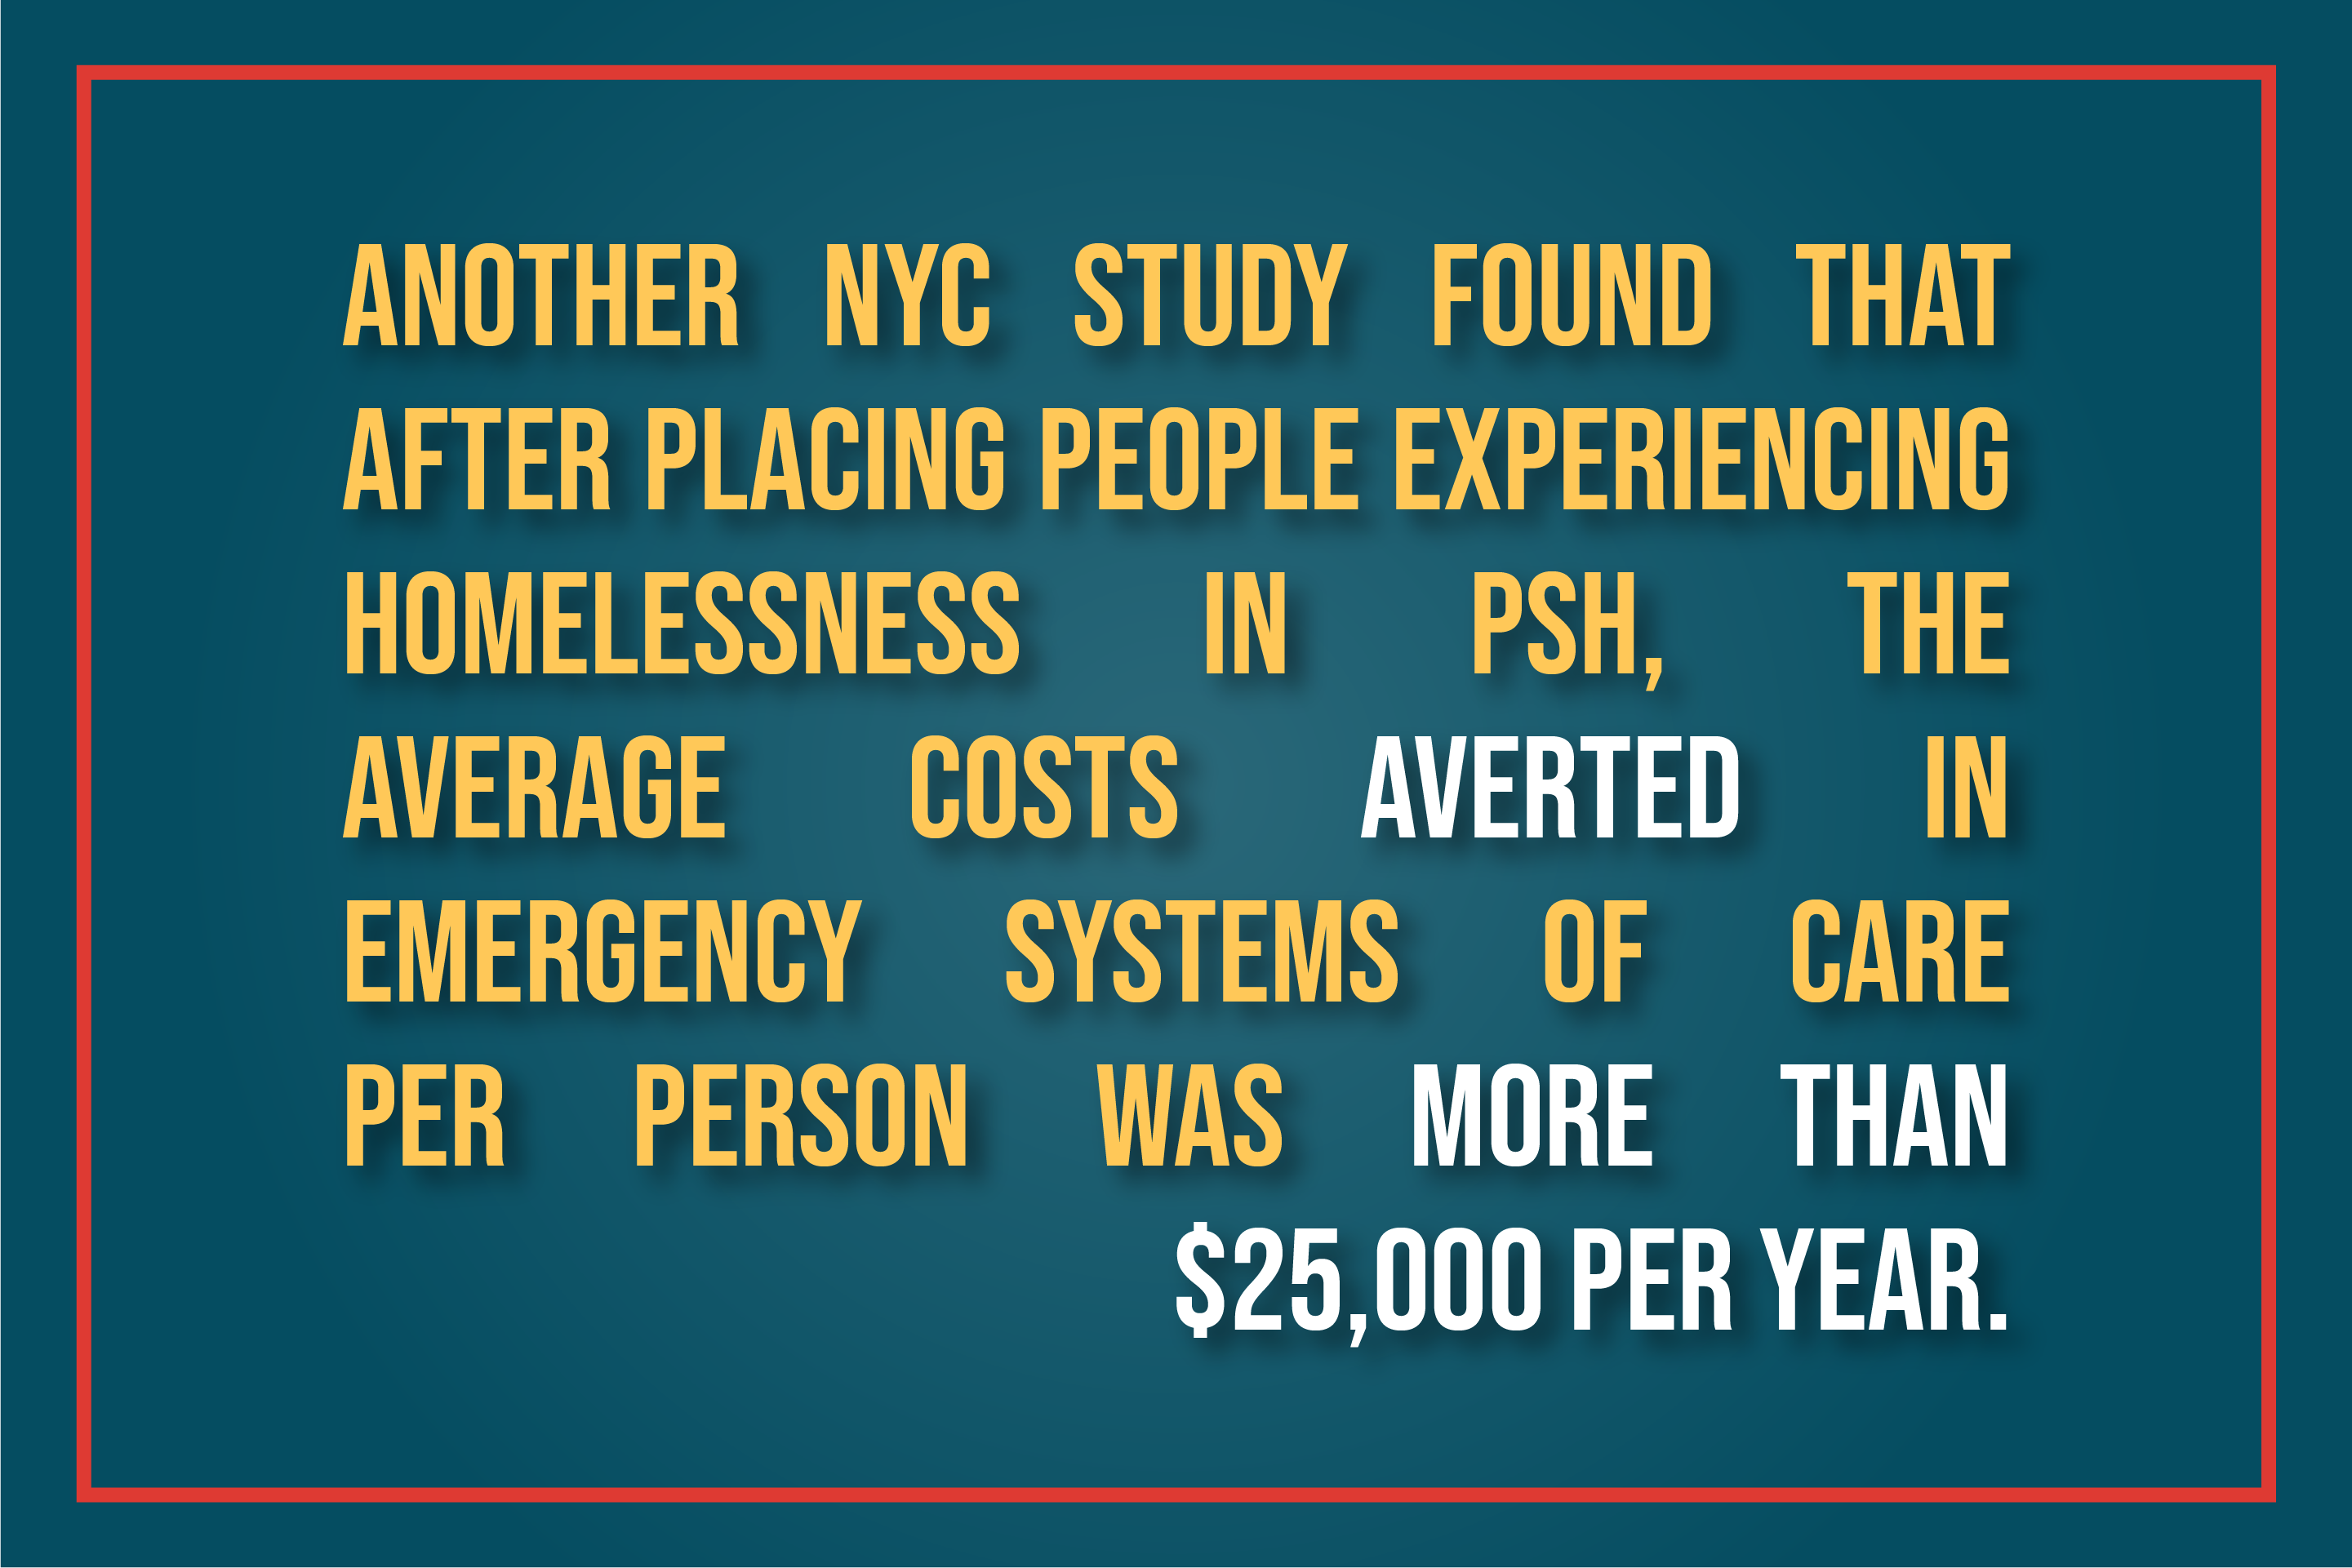 One NYC study found that the average costs averted in emergency systems of care per person was more than $25,000 per year.